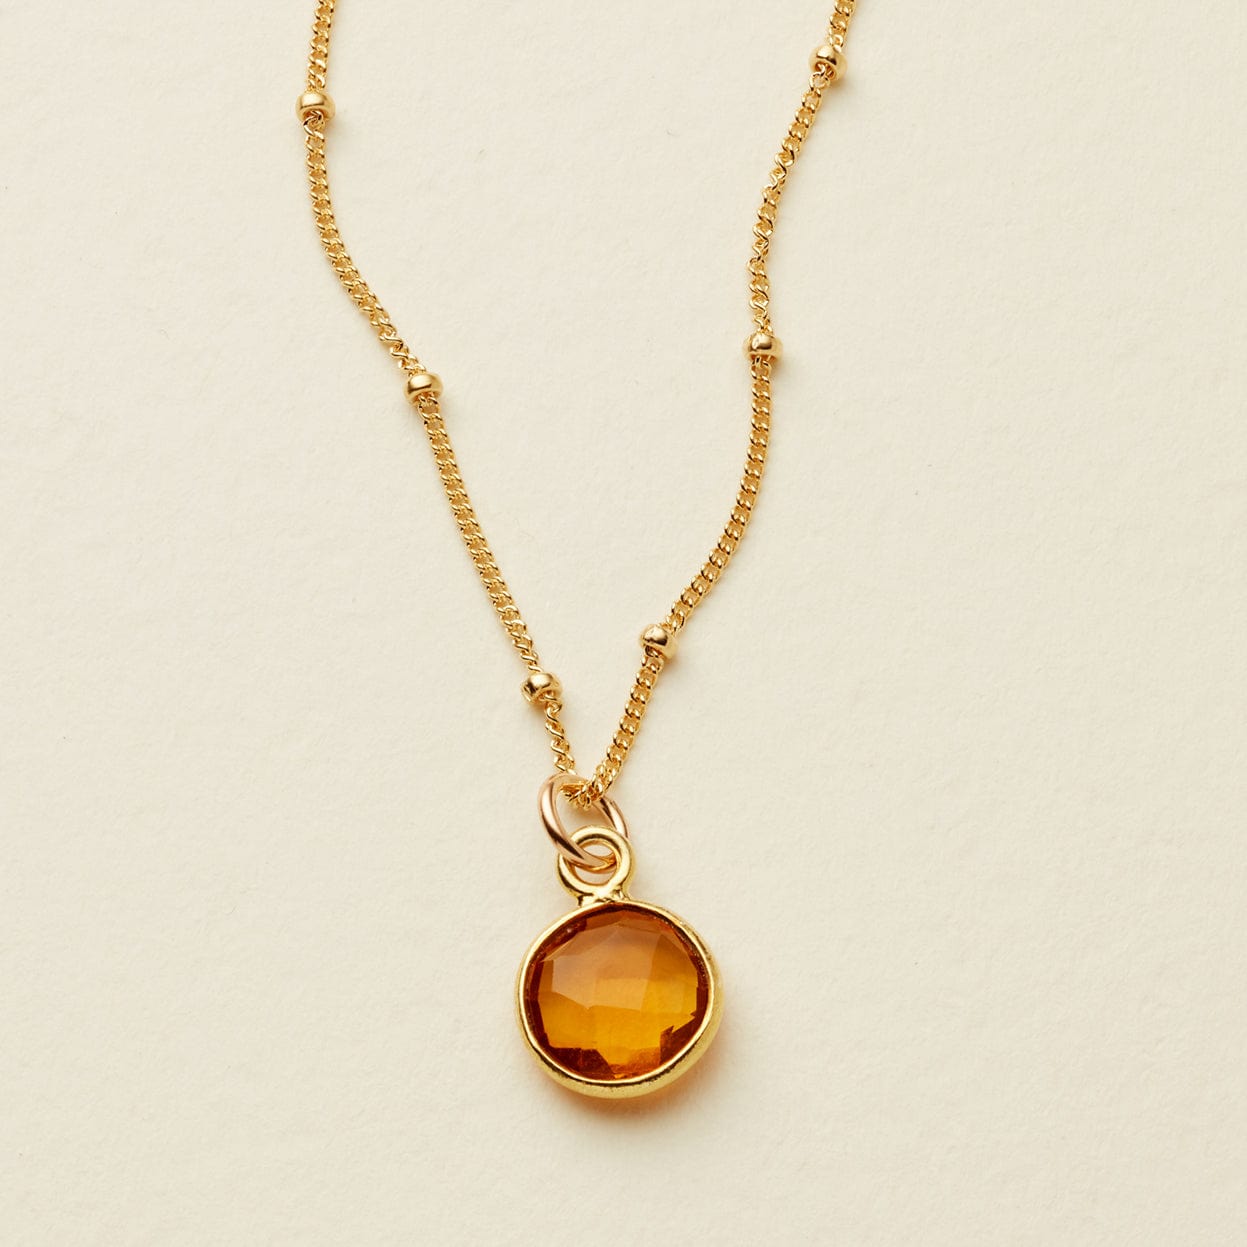 Afterglow Gemstone Necklace Gold Filled / 16" Necklace